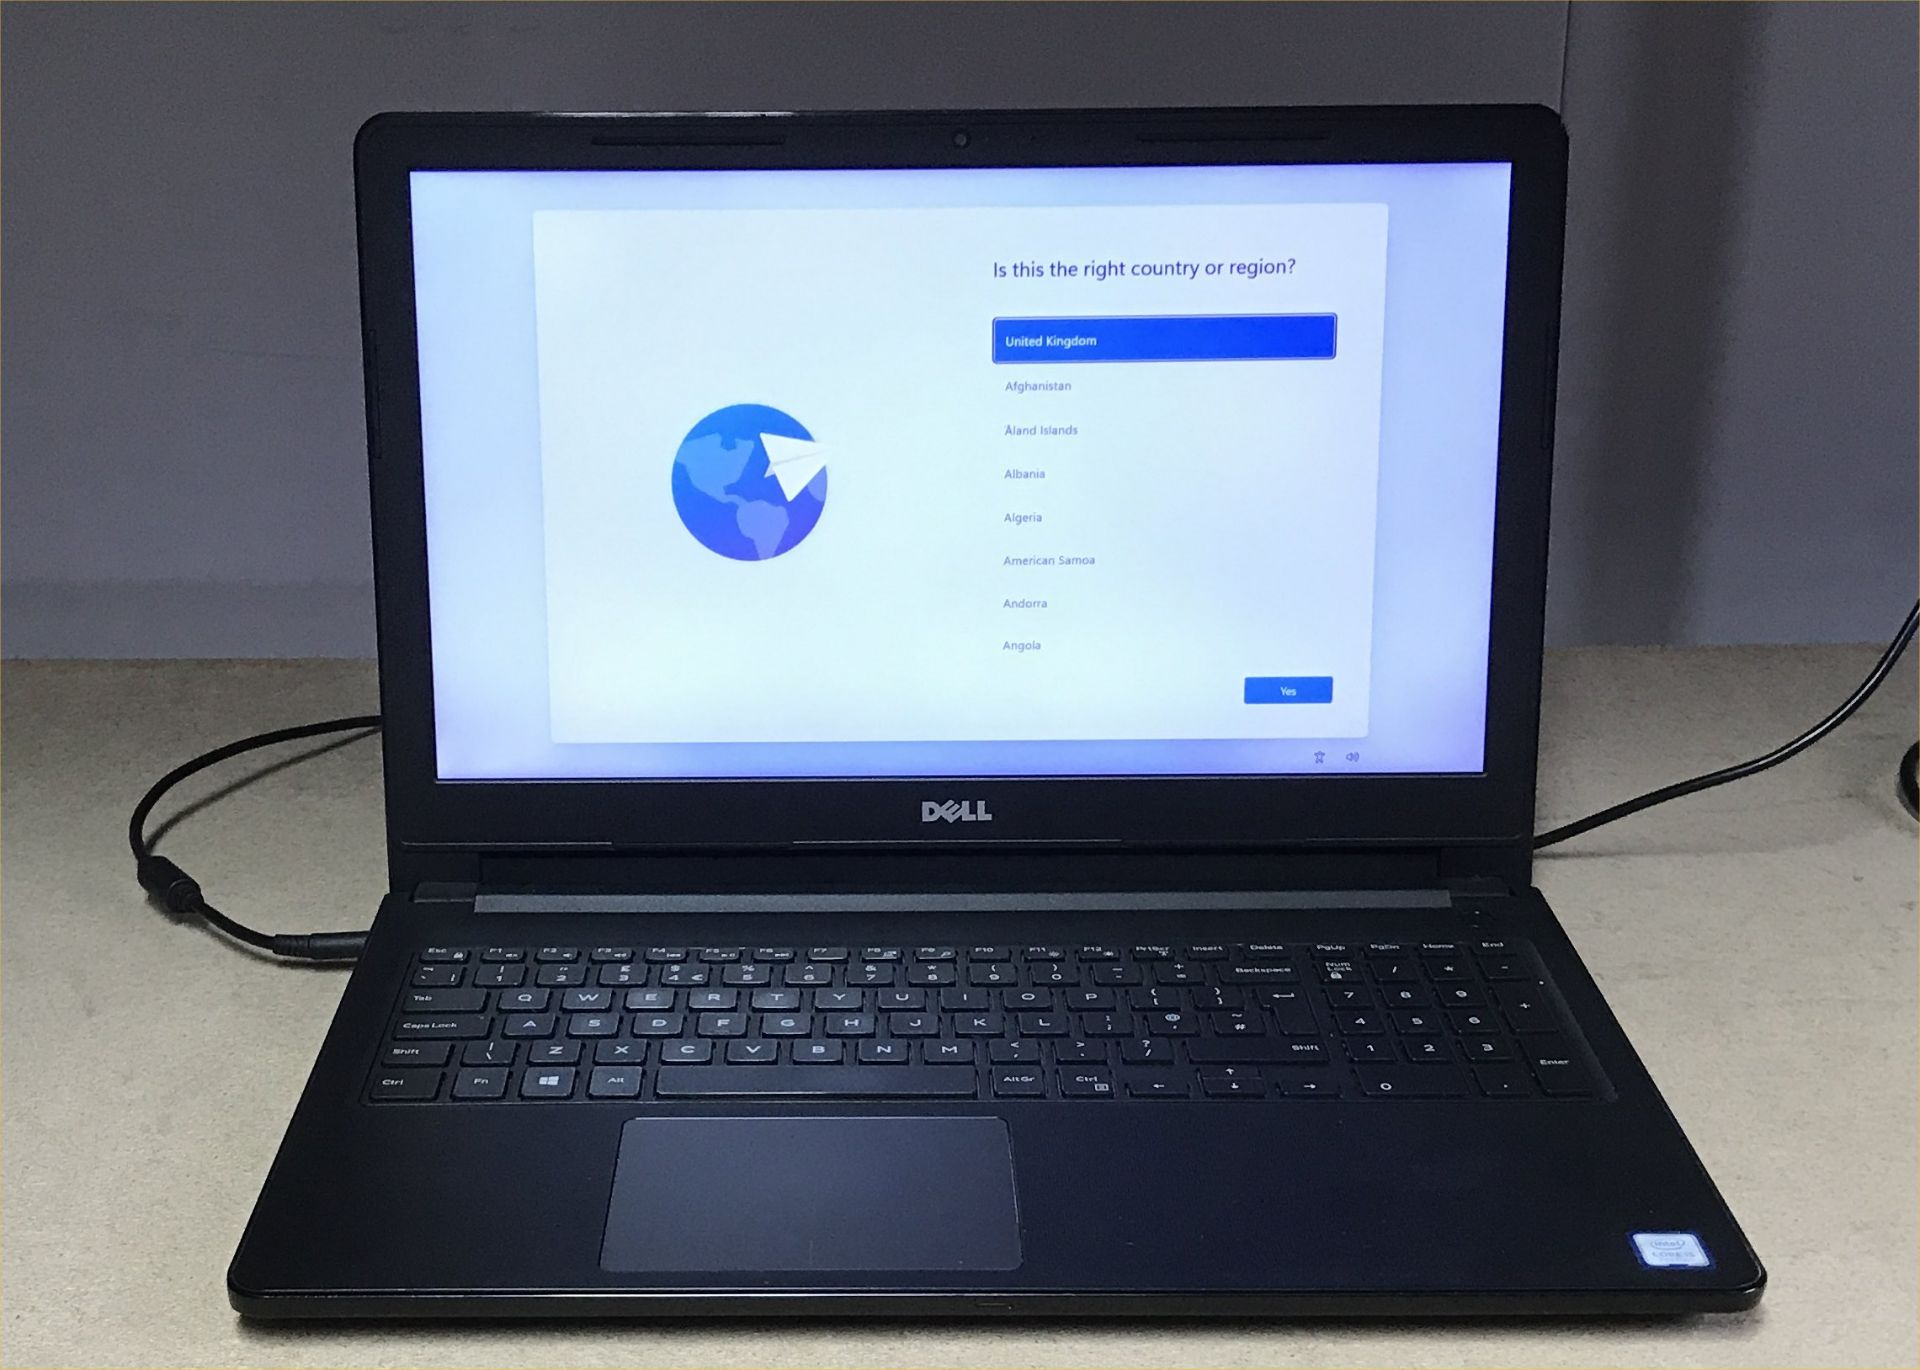 DELL VOSTRO 15 3568 LAPTOP, INTEL i5-7200 CPU, 8GB RAM, 1TB HDD WITH CHARGER (DATA WIPED & WINDOWS